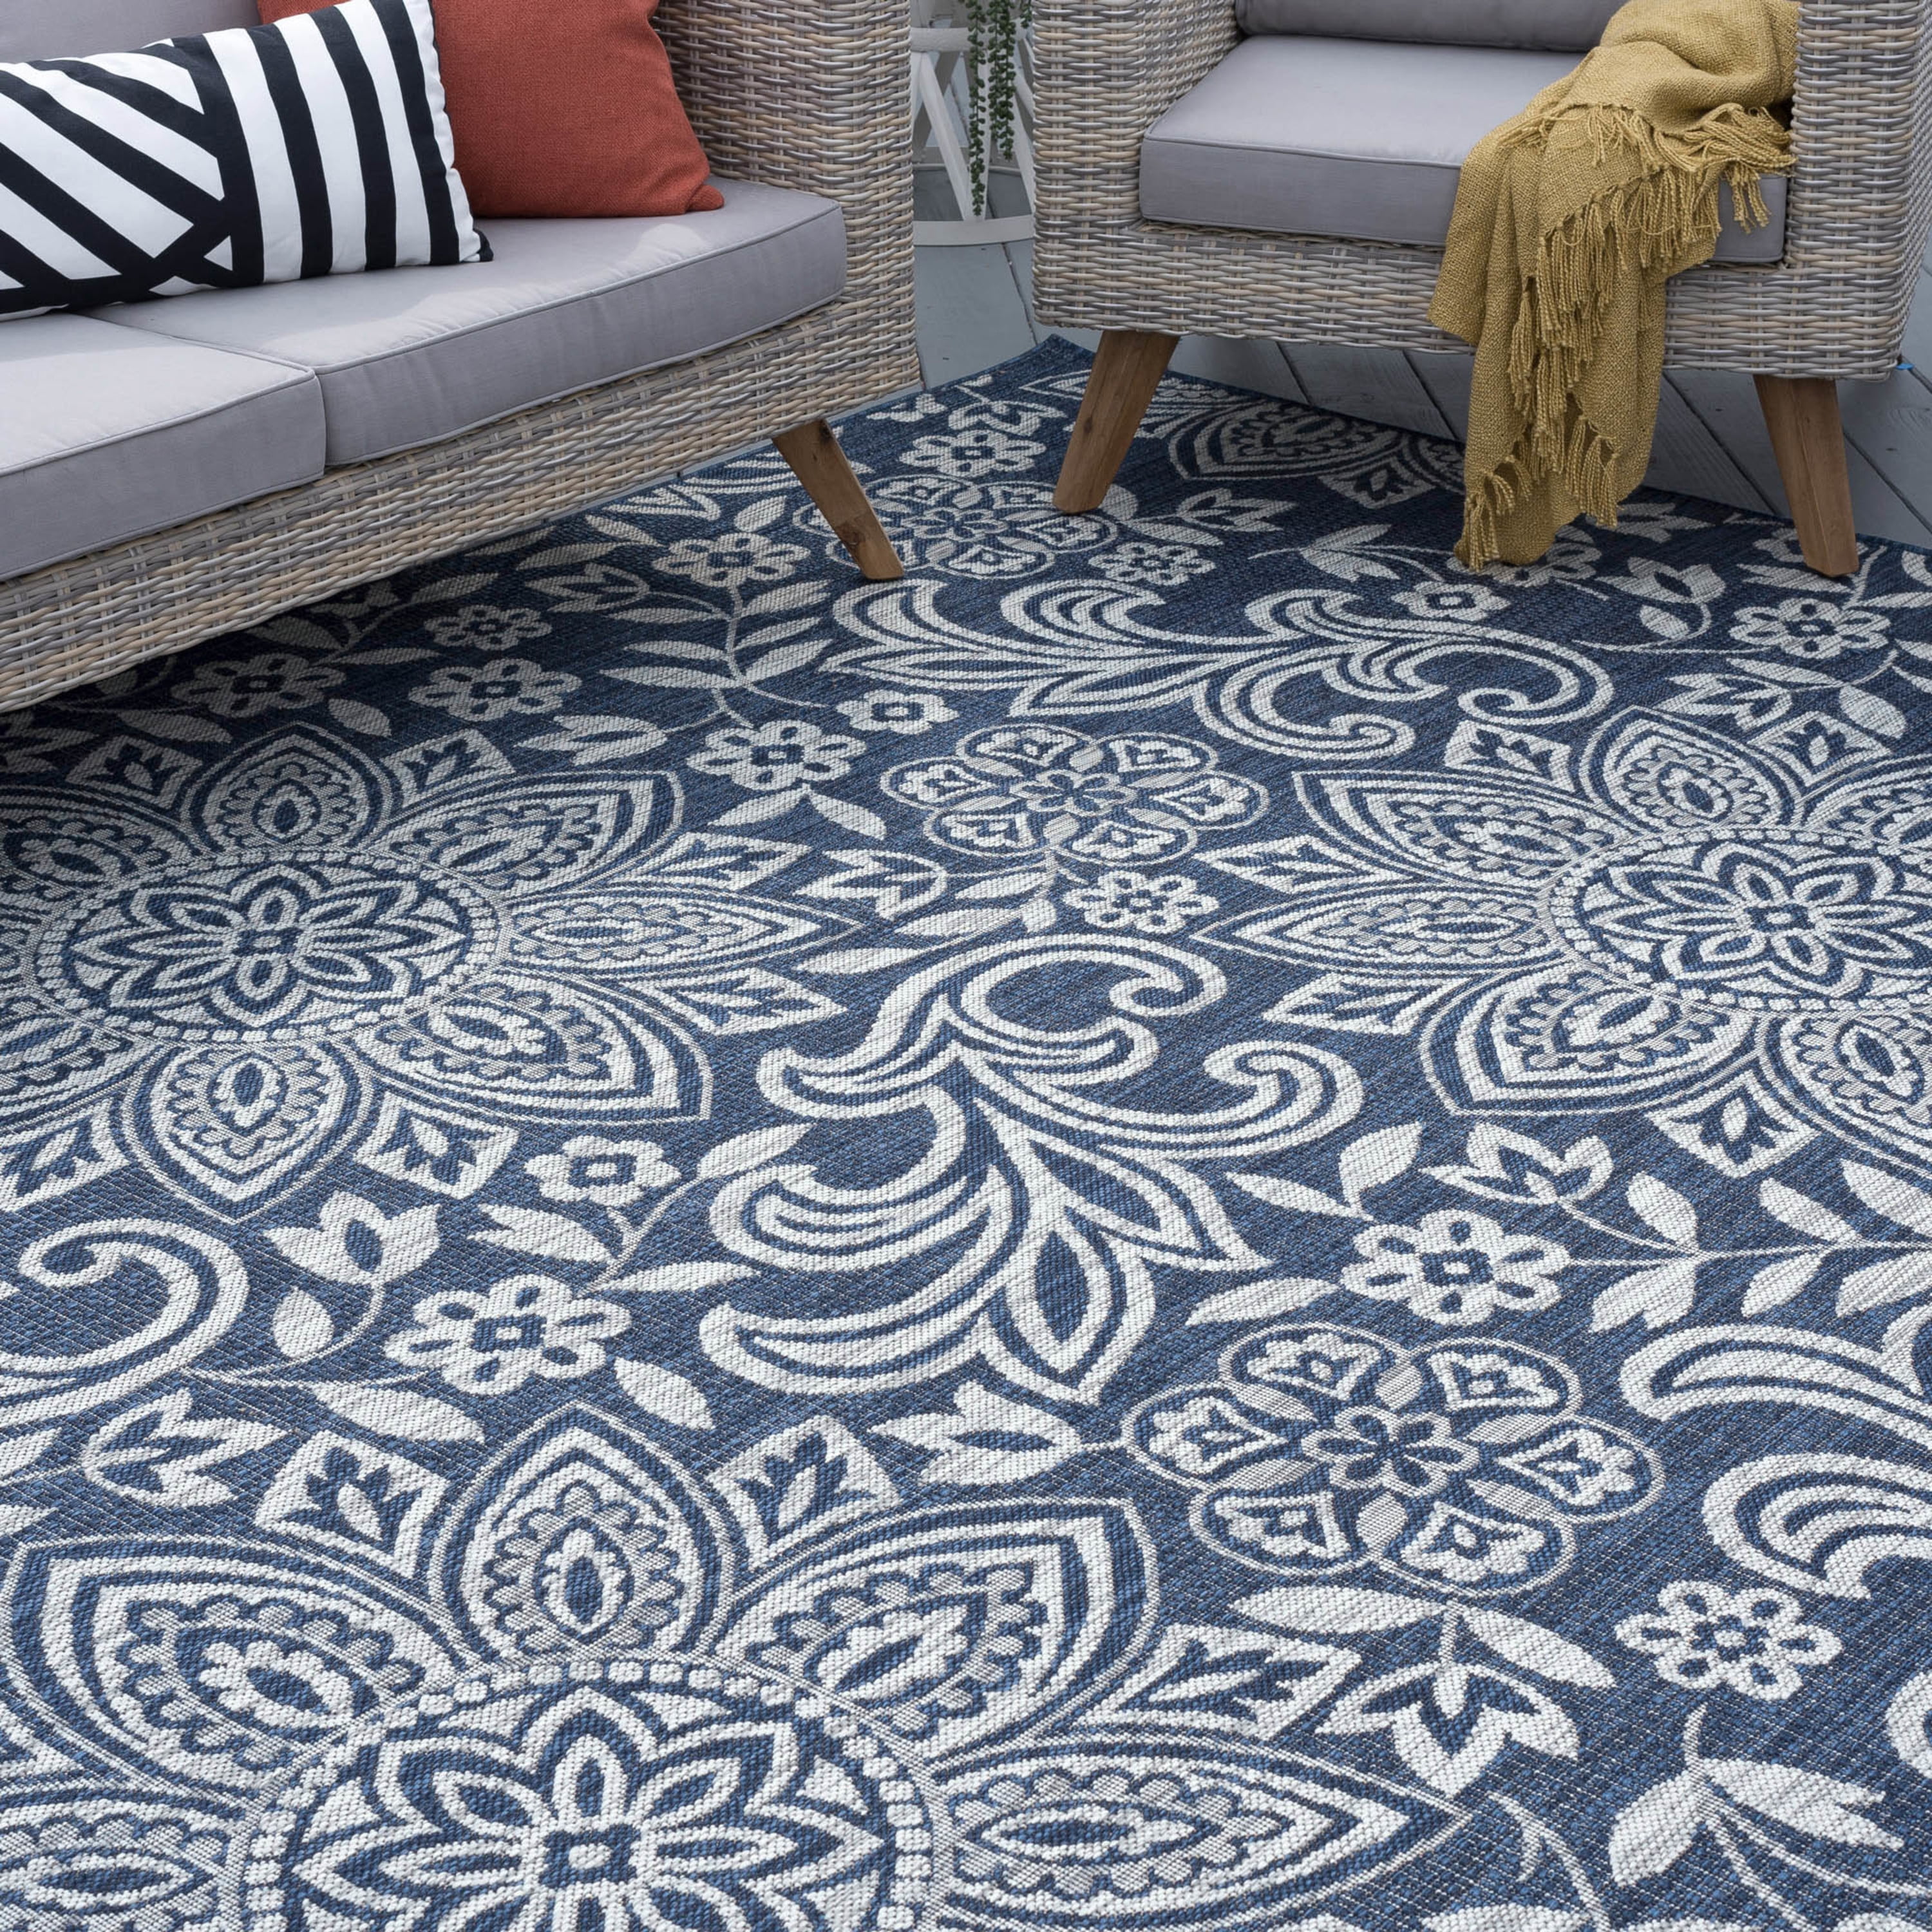 Waterproof rug available new stock. #lchome #rugs #carpets #carpetcambodia